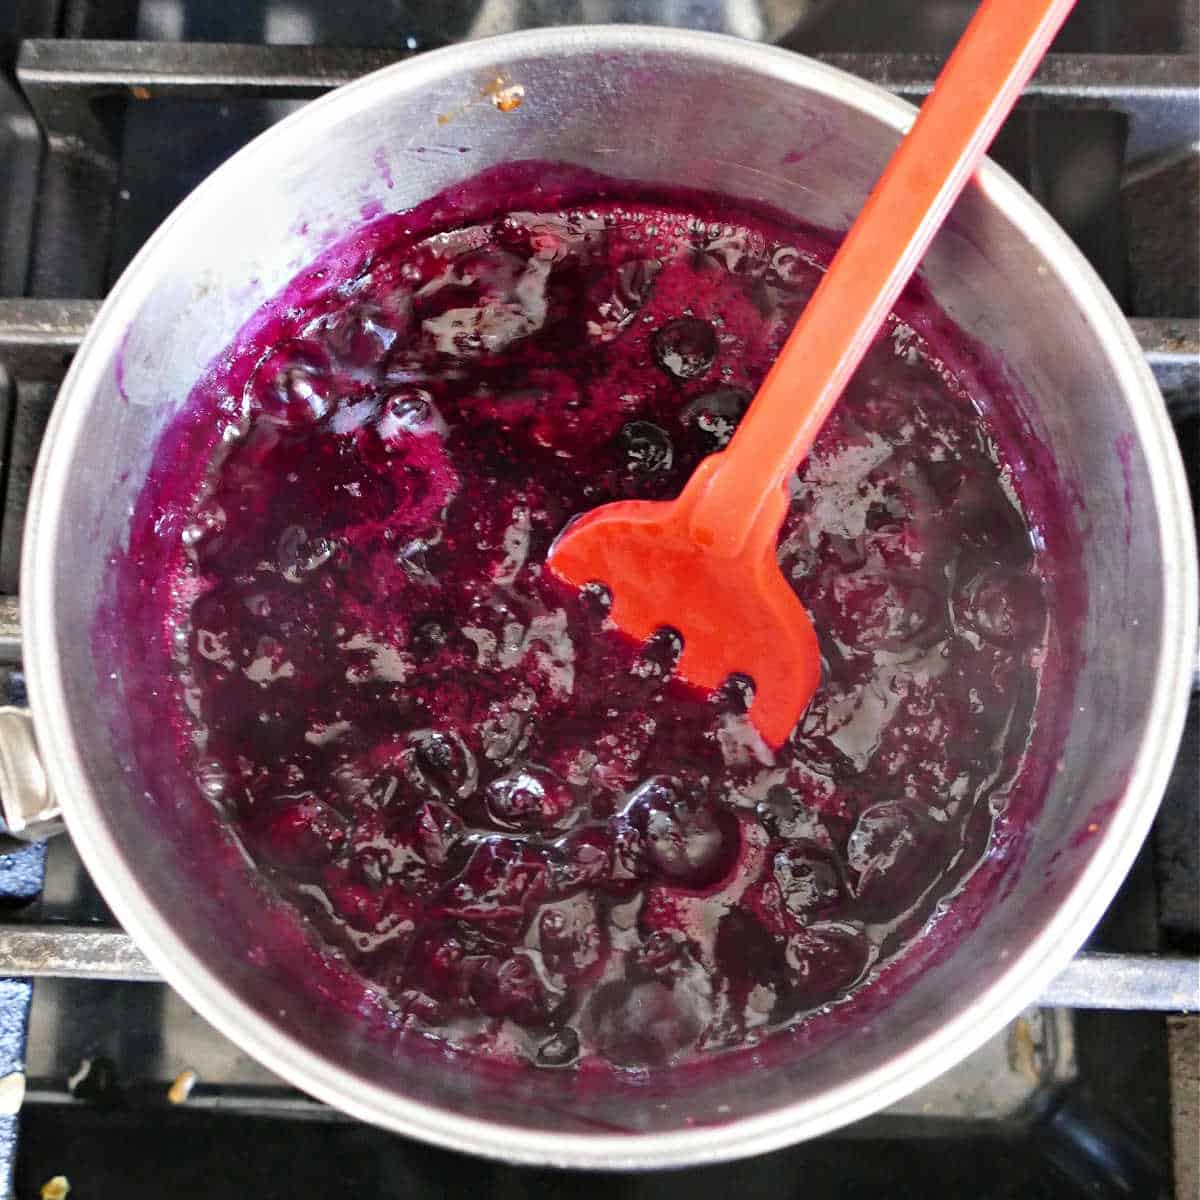 blueberries cooking in a saucepan on a stove to make jam